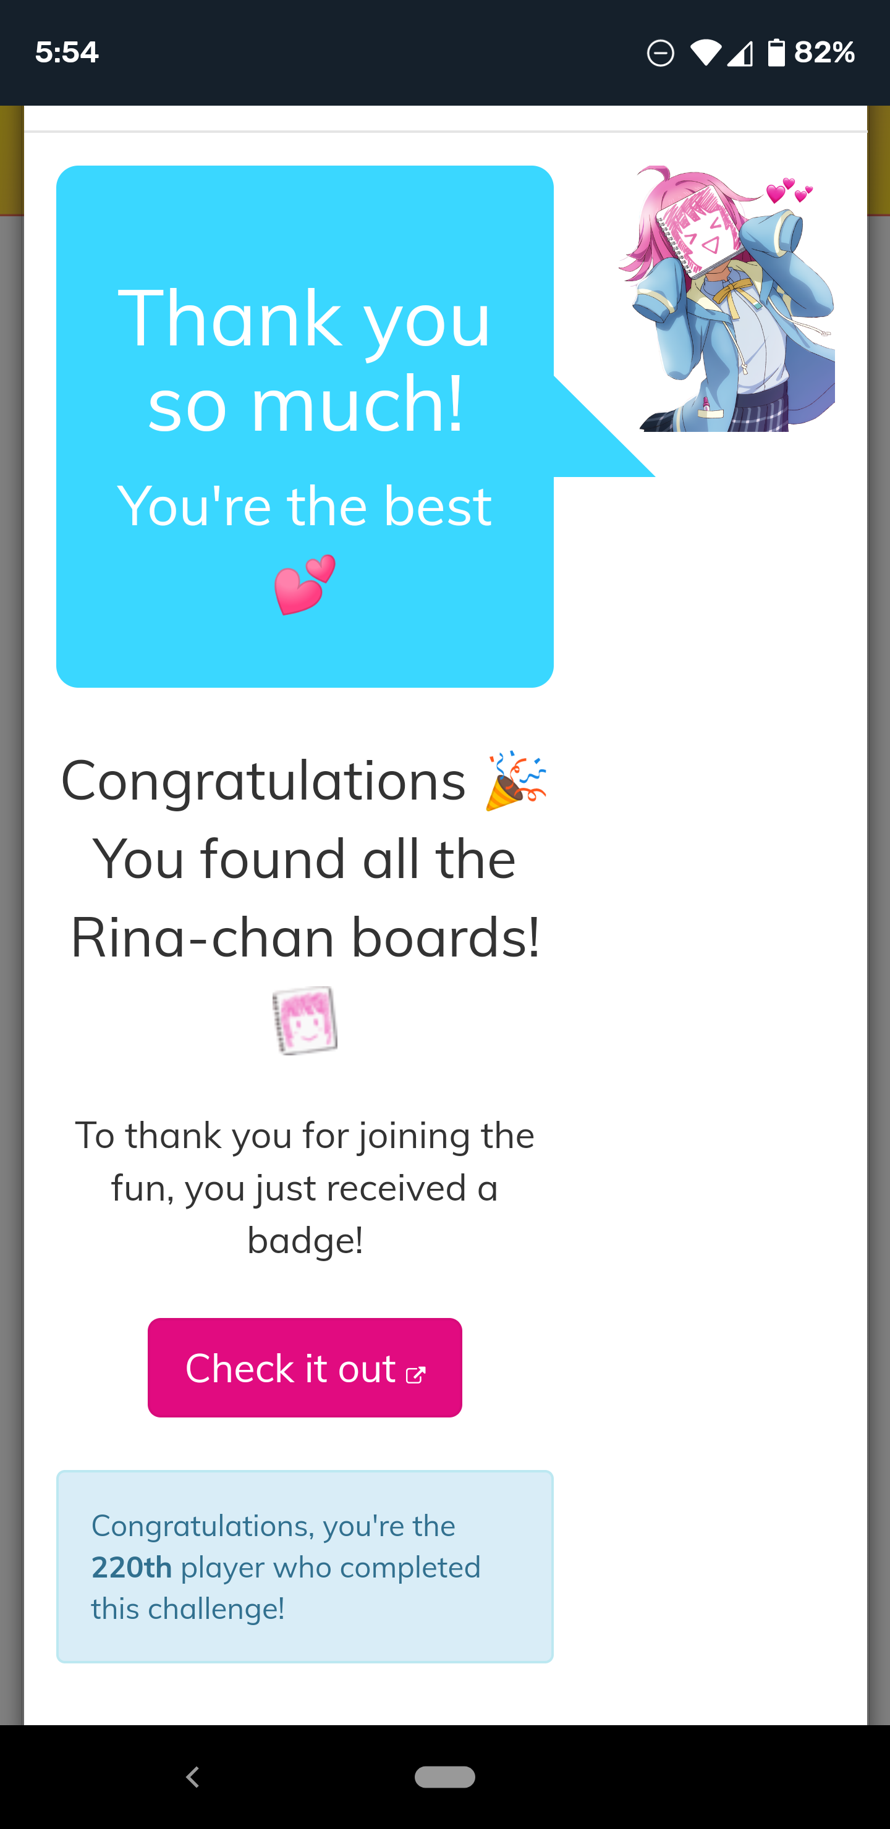 I have your boards, Rina chan~! 

Was fun searching, so many were hidden right in front of me lol.

